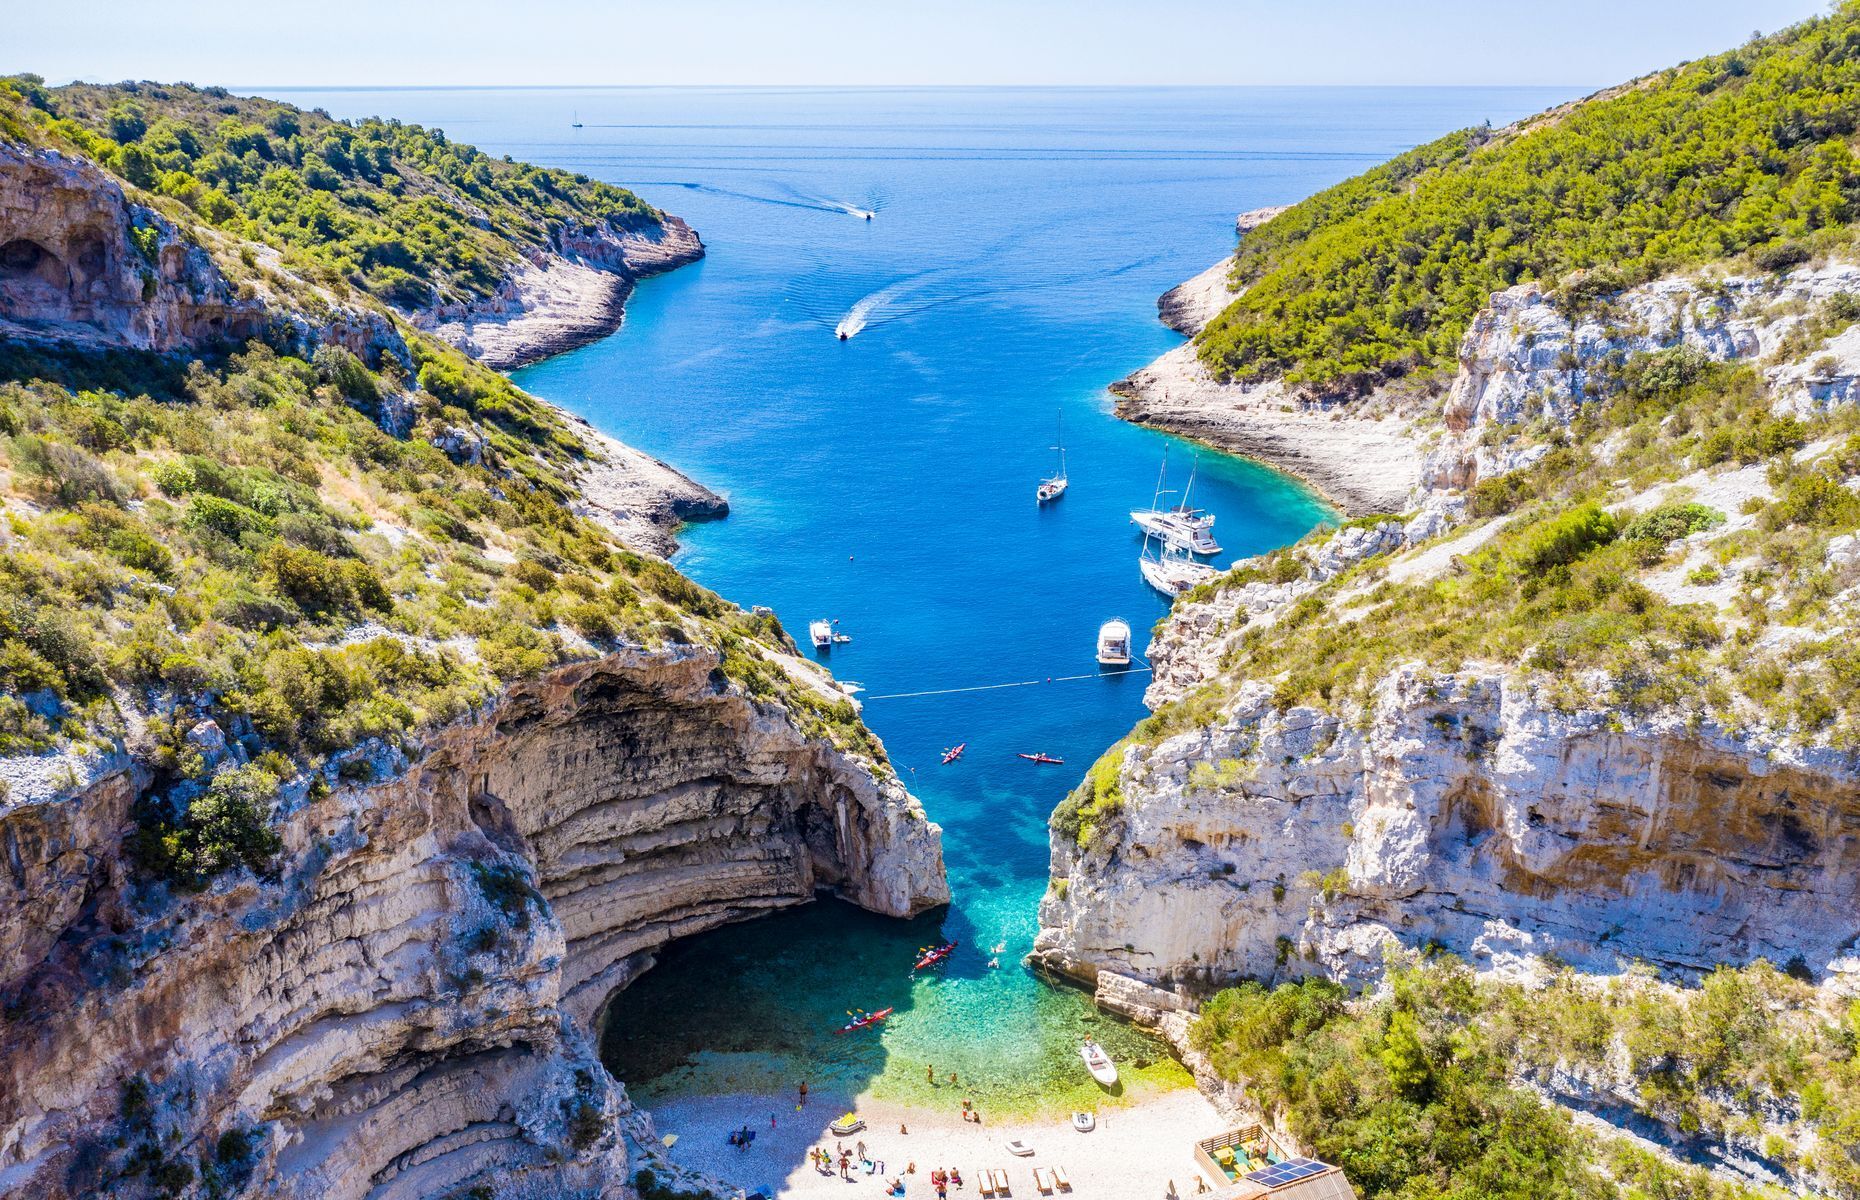 An untouched pearl of the Adriatic, the island of <a href="https://travelmelodies.com/the-island-of-vis-in-croatia/" rel="noreferrer noopener">Vis</a> boasts heavenly beaches, such as Stiniva and Srebrna, as well as renowned vineyards. This magical place is also perfect for diving, kayaking, and even exploring underwater caves and shipwrecks. A visit to the archaeological museum and old-town ruins will delight culture buffs.